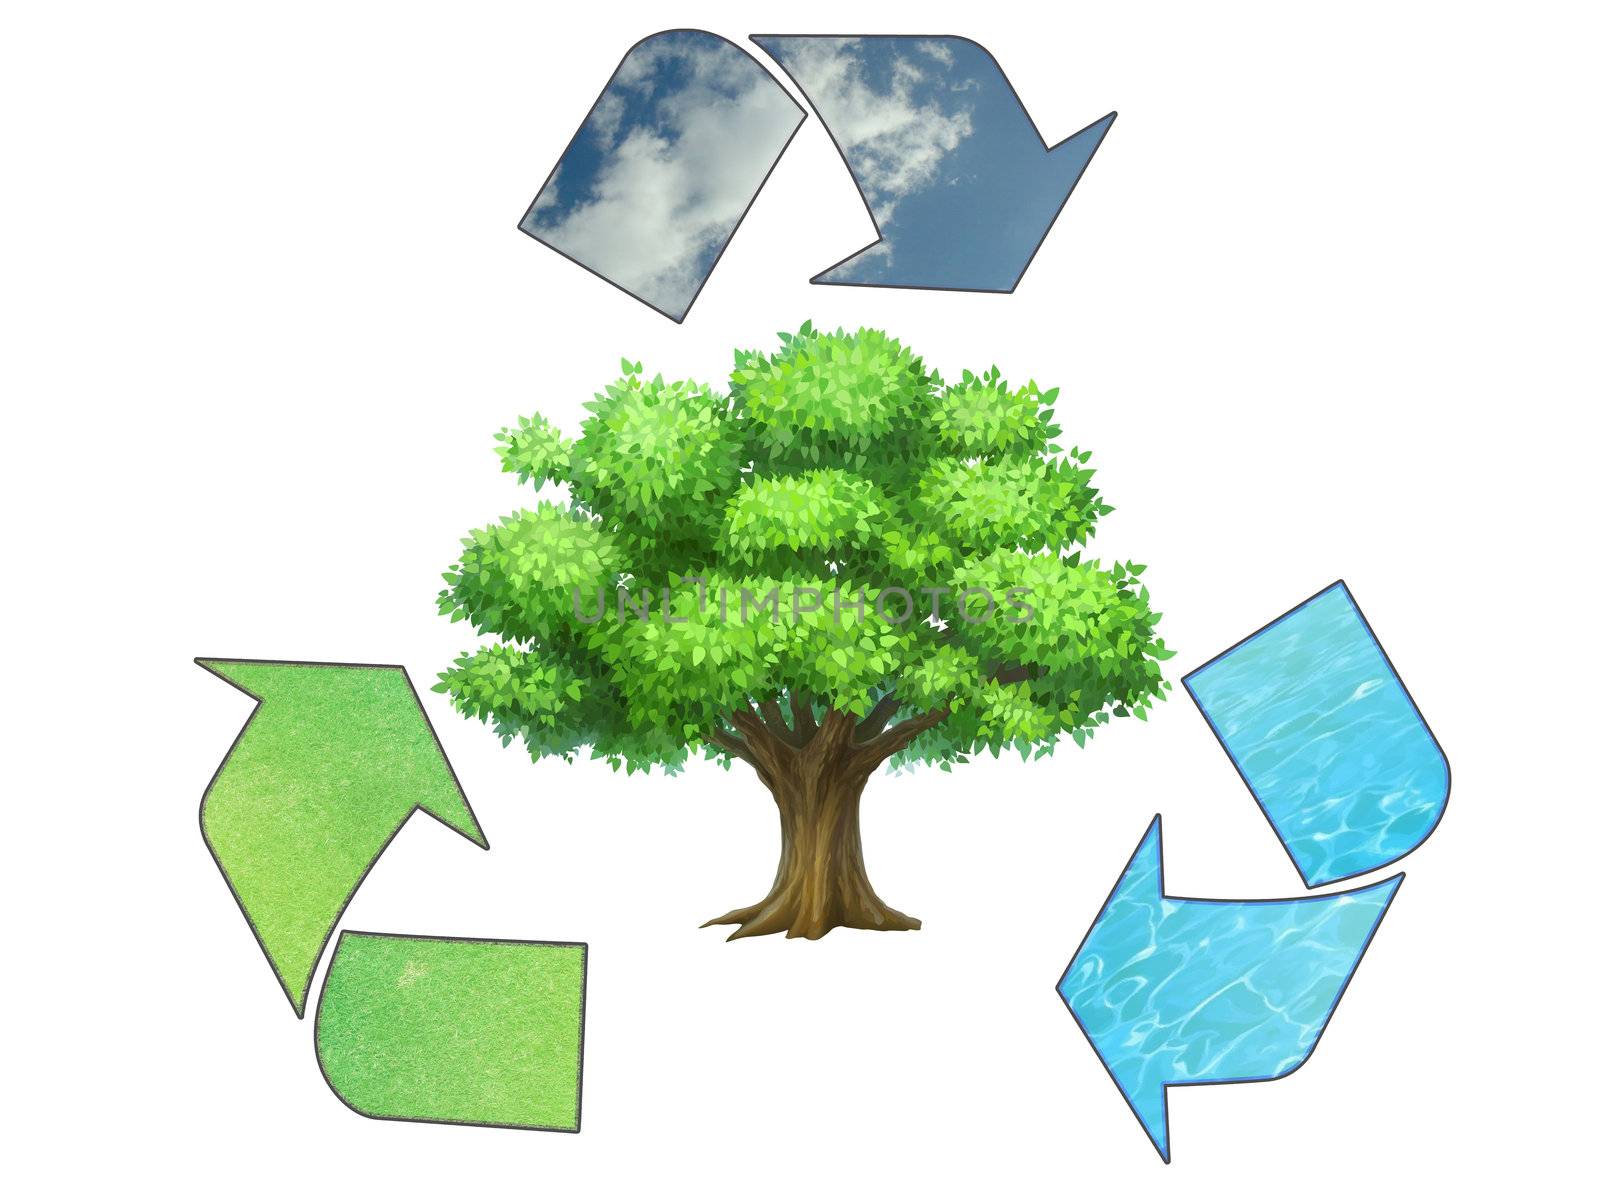 Save the earth - conceptual recycling symbol by dacasdo